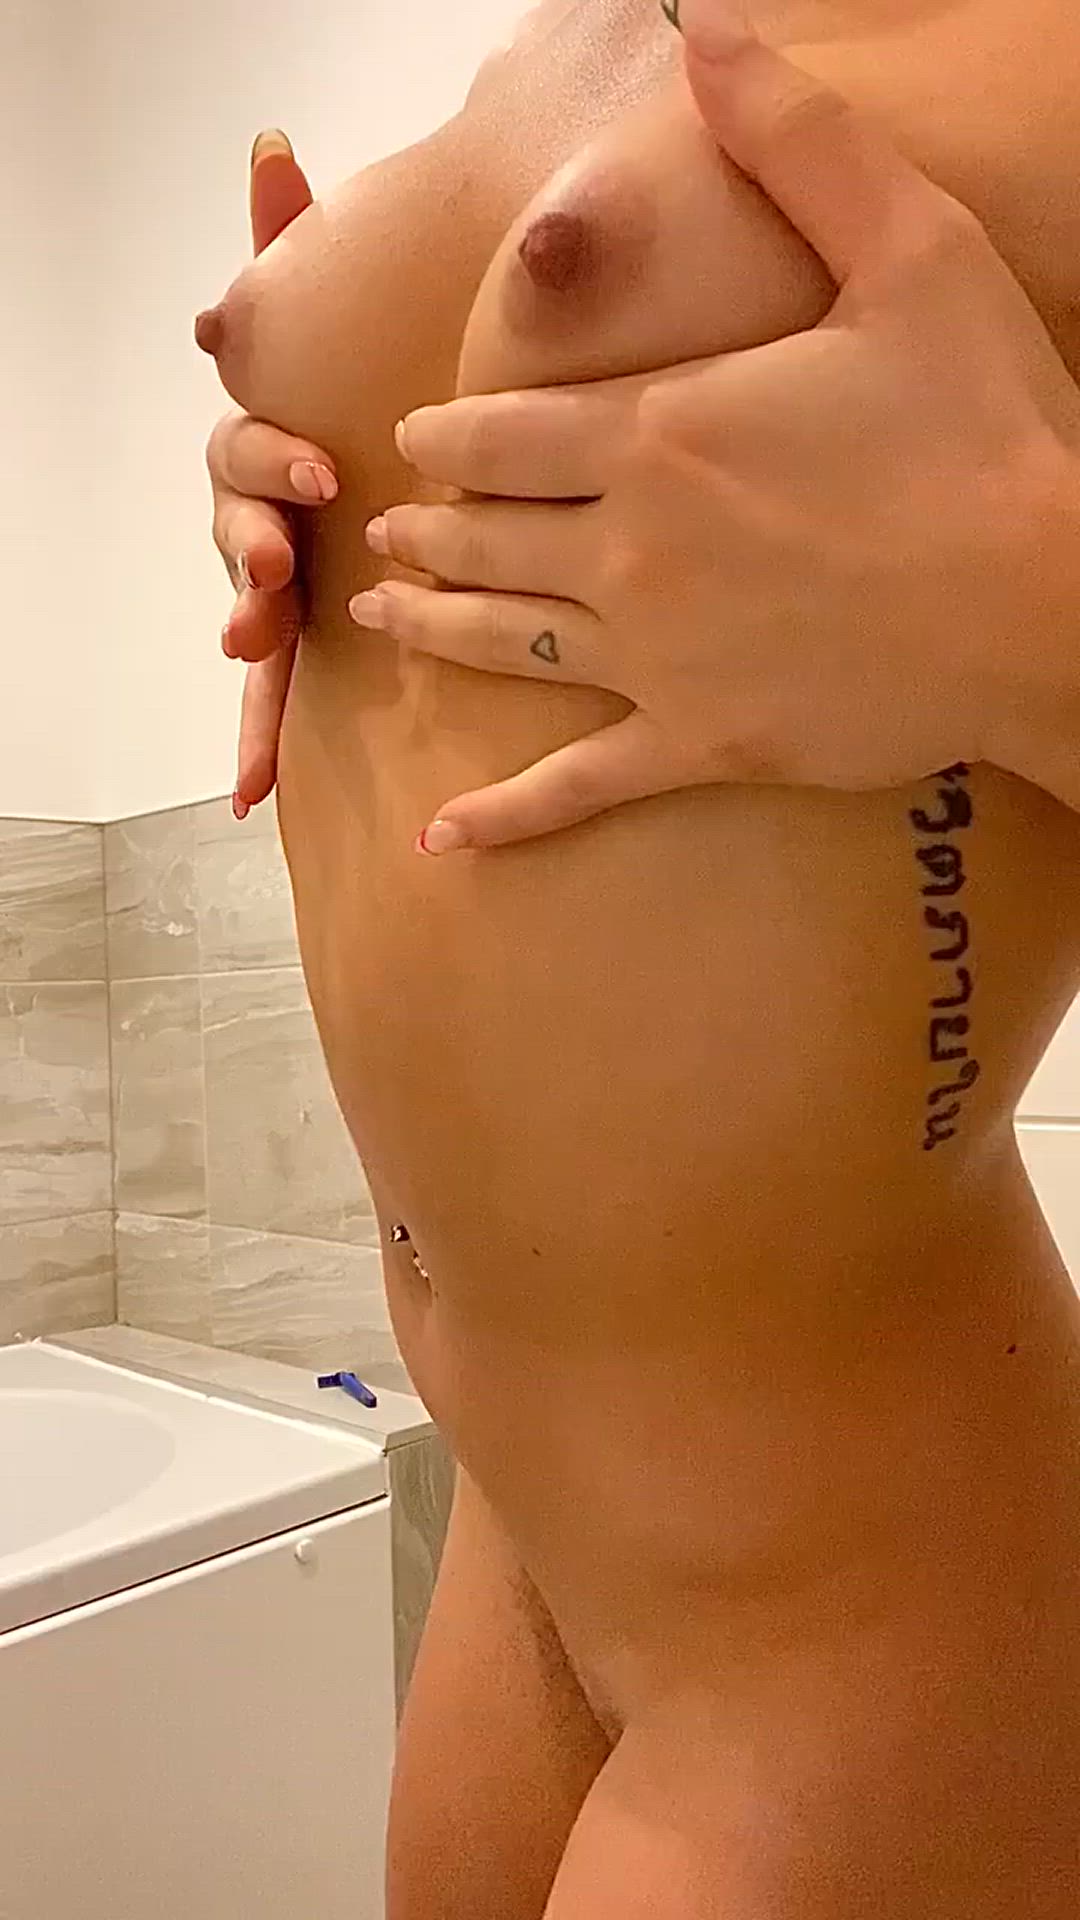 Ass porn video with onlyfans model Issa✨ <strong>@aliaissa</strong>